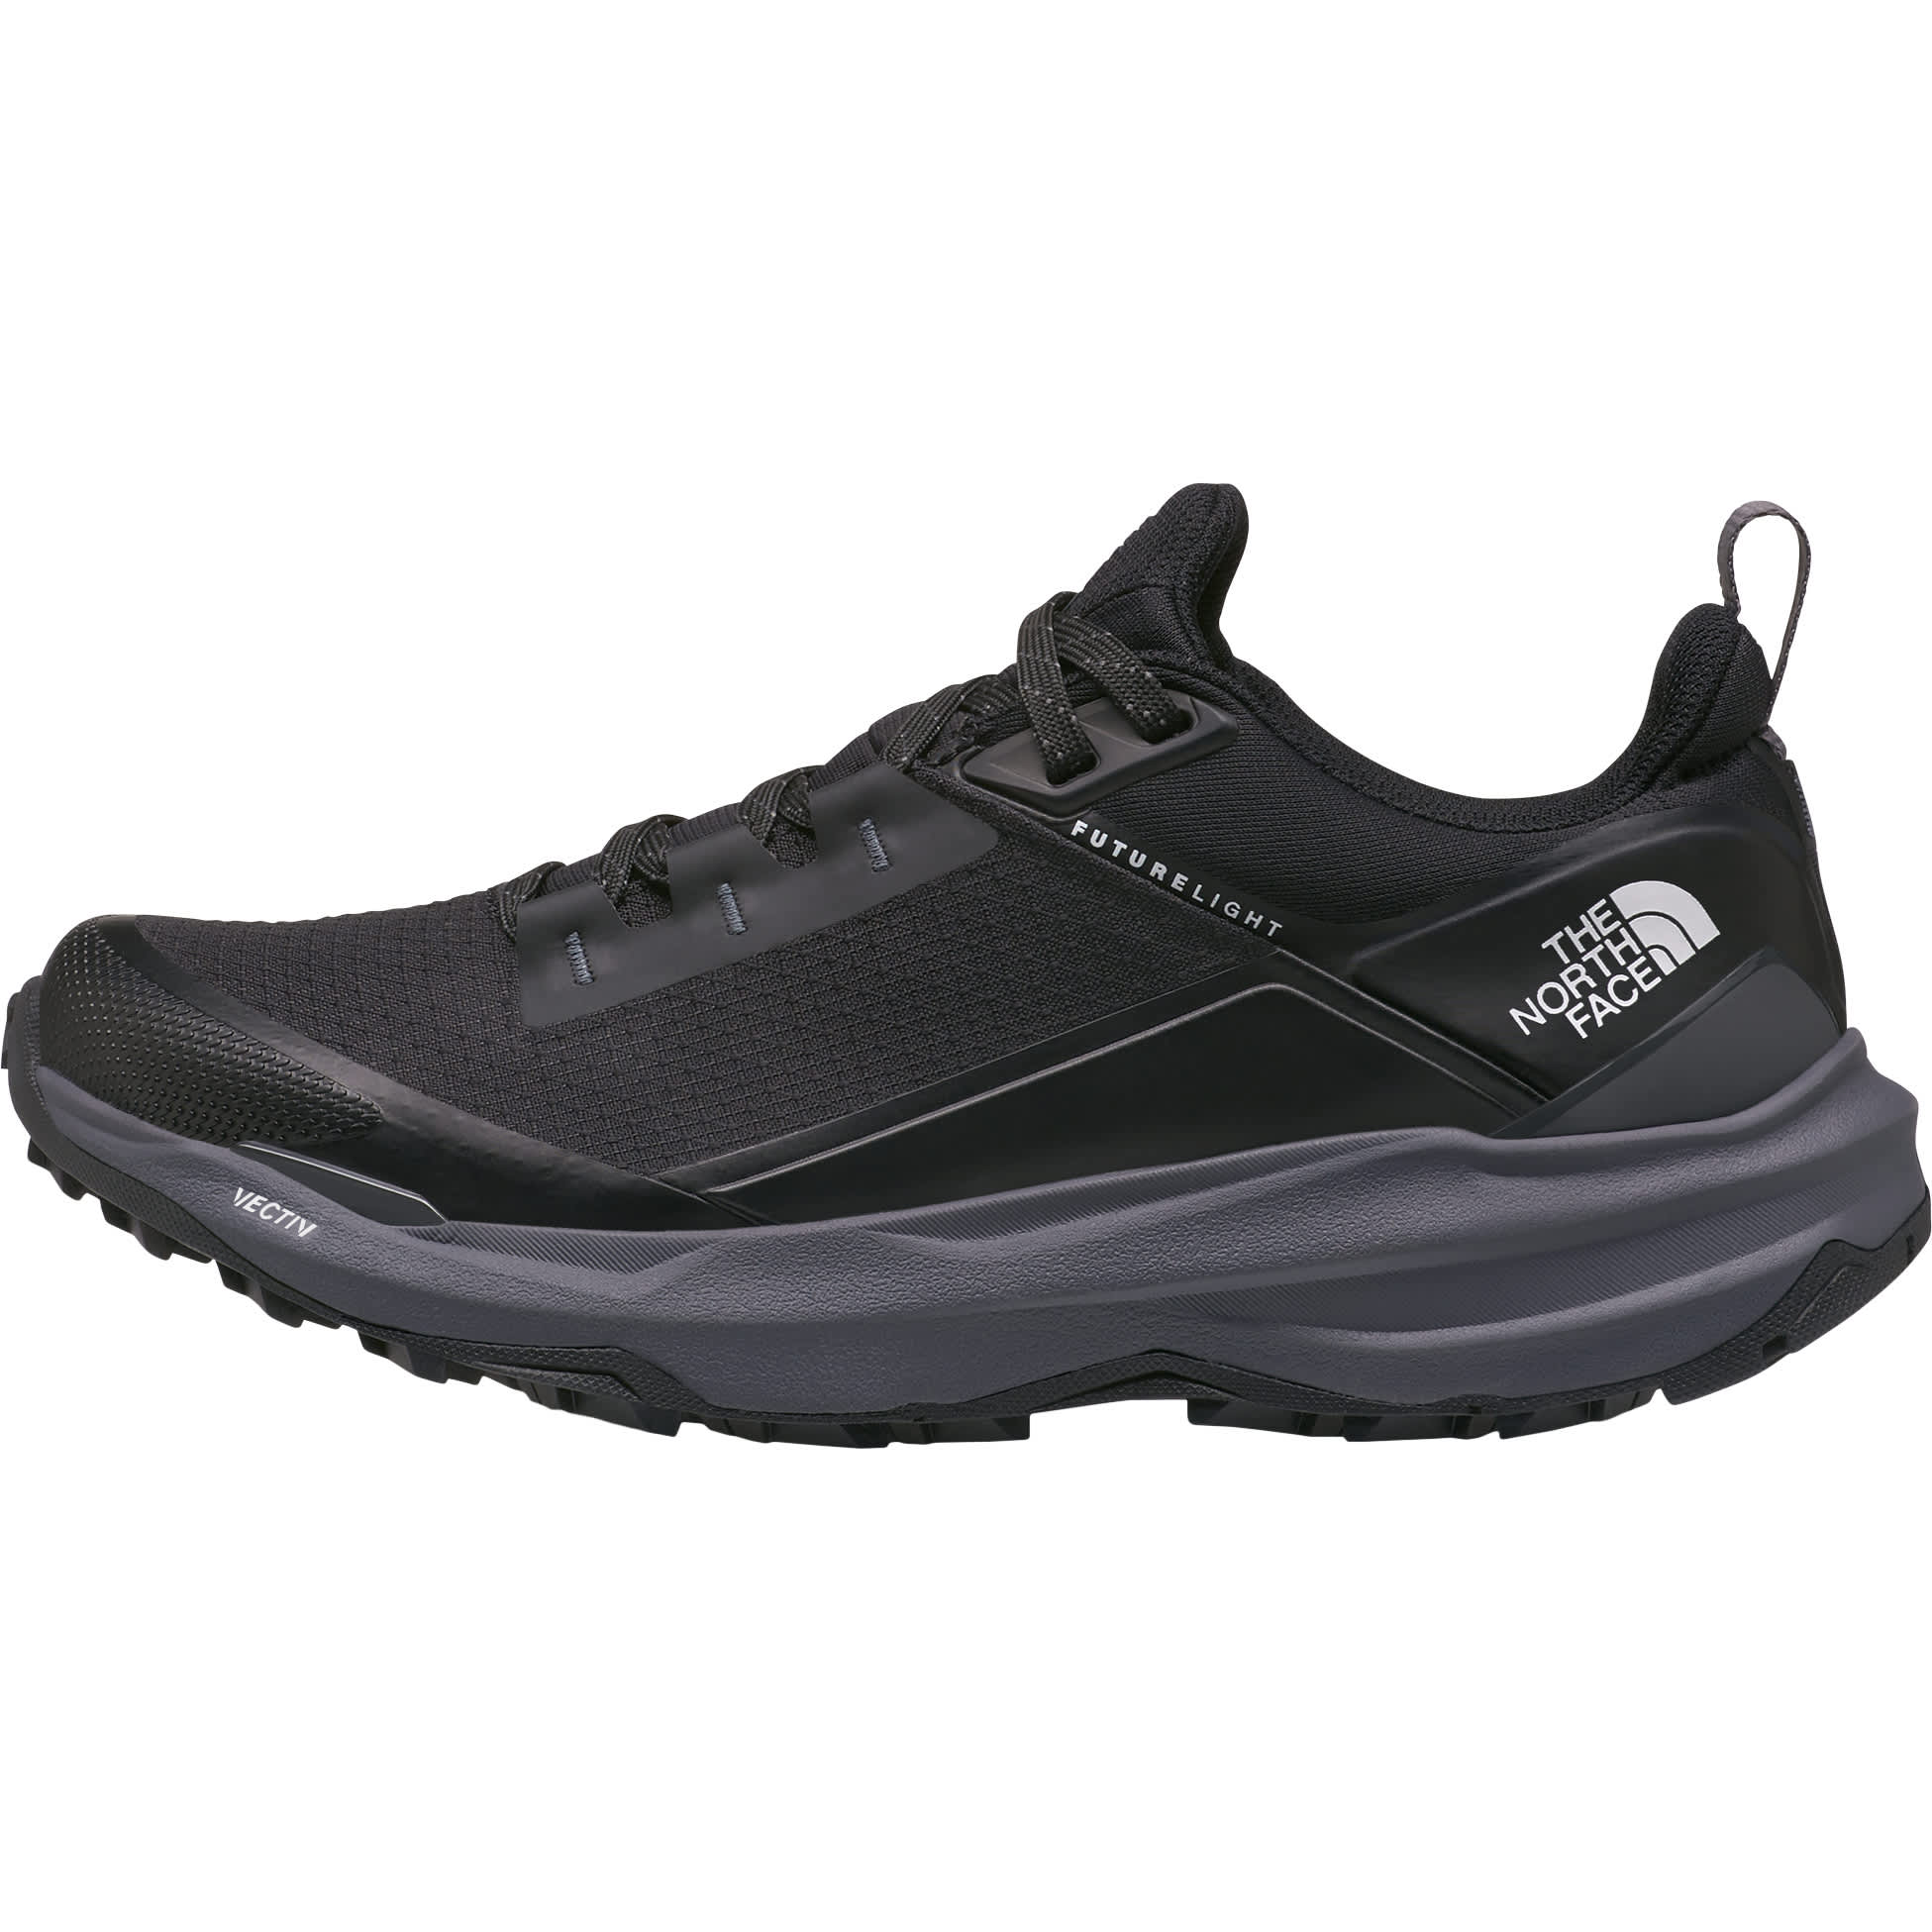 Under Armour Charged Bandit TR 2 SP Women's Trail Shoes Black